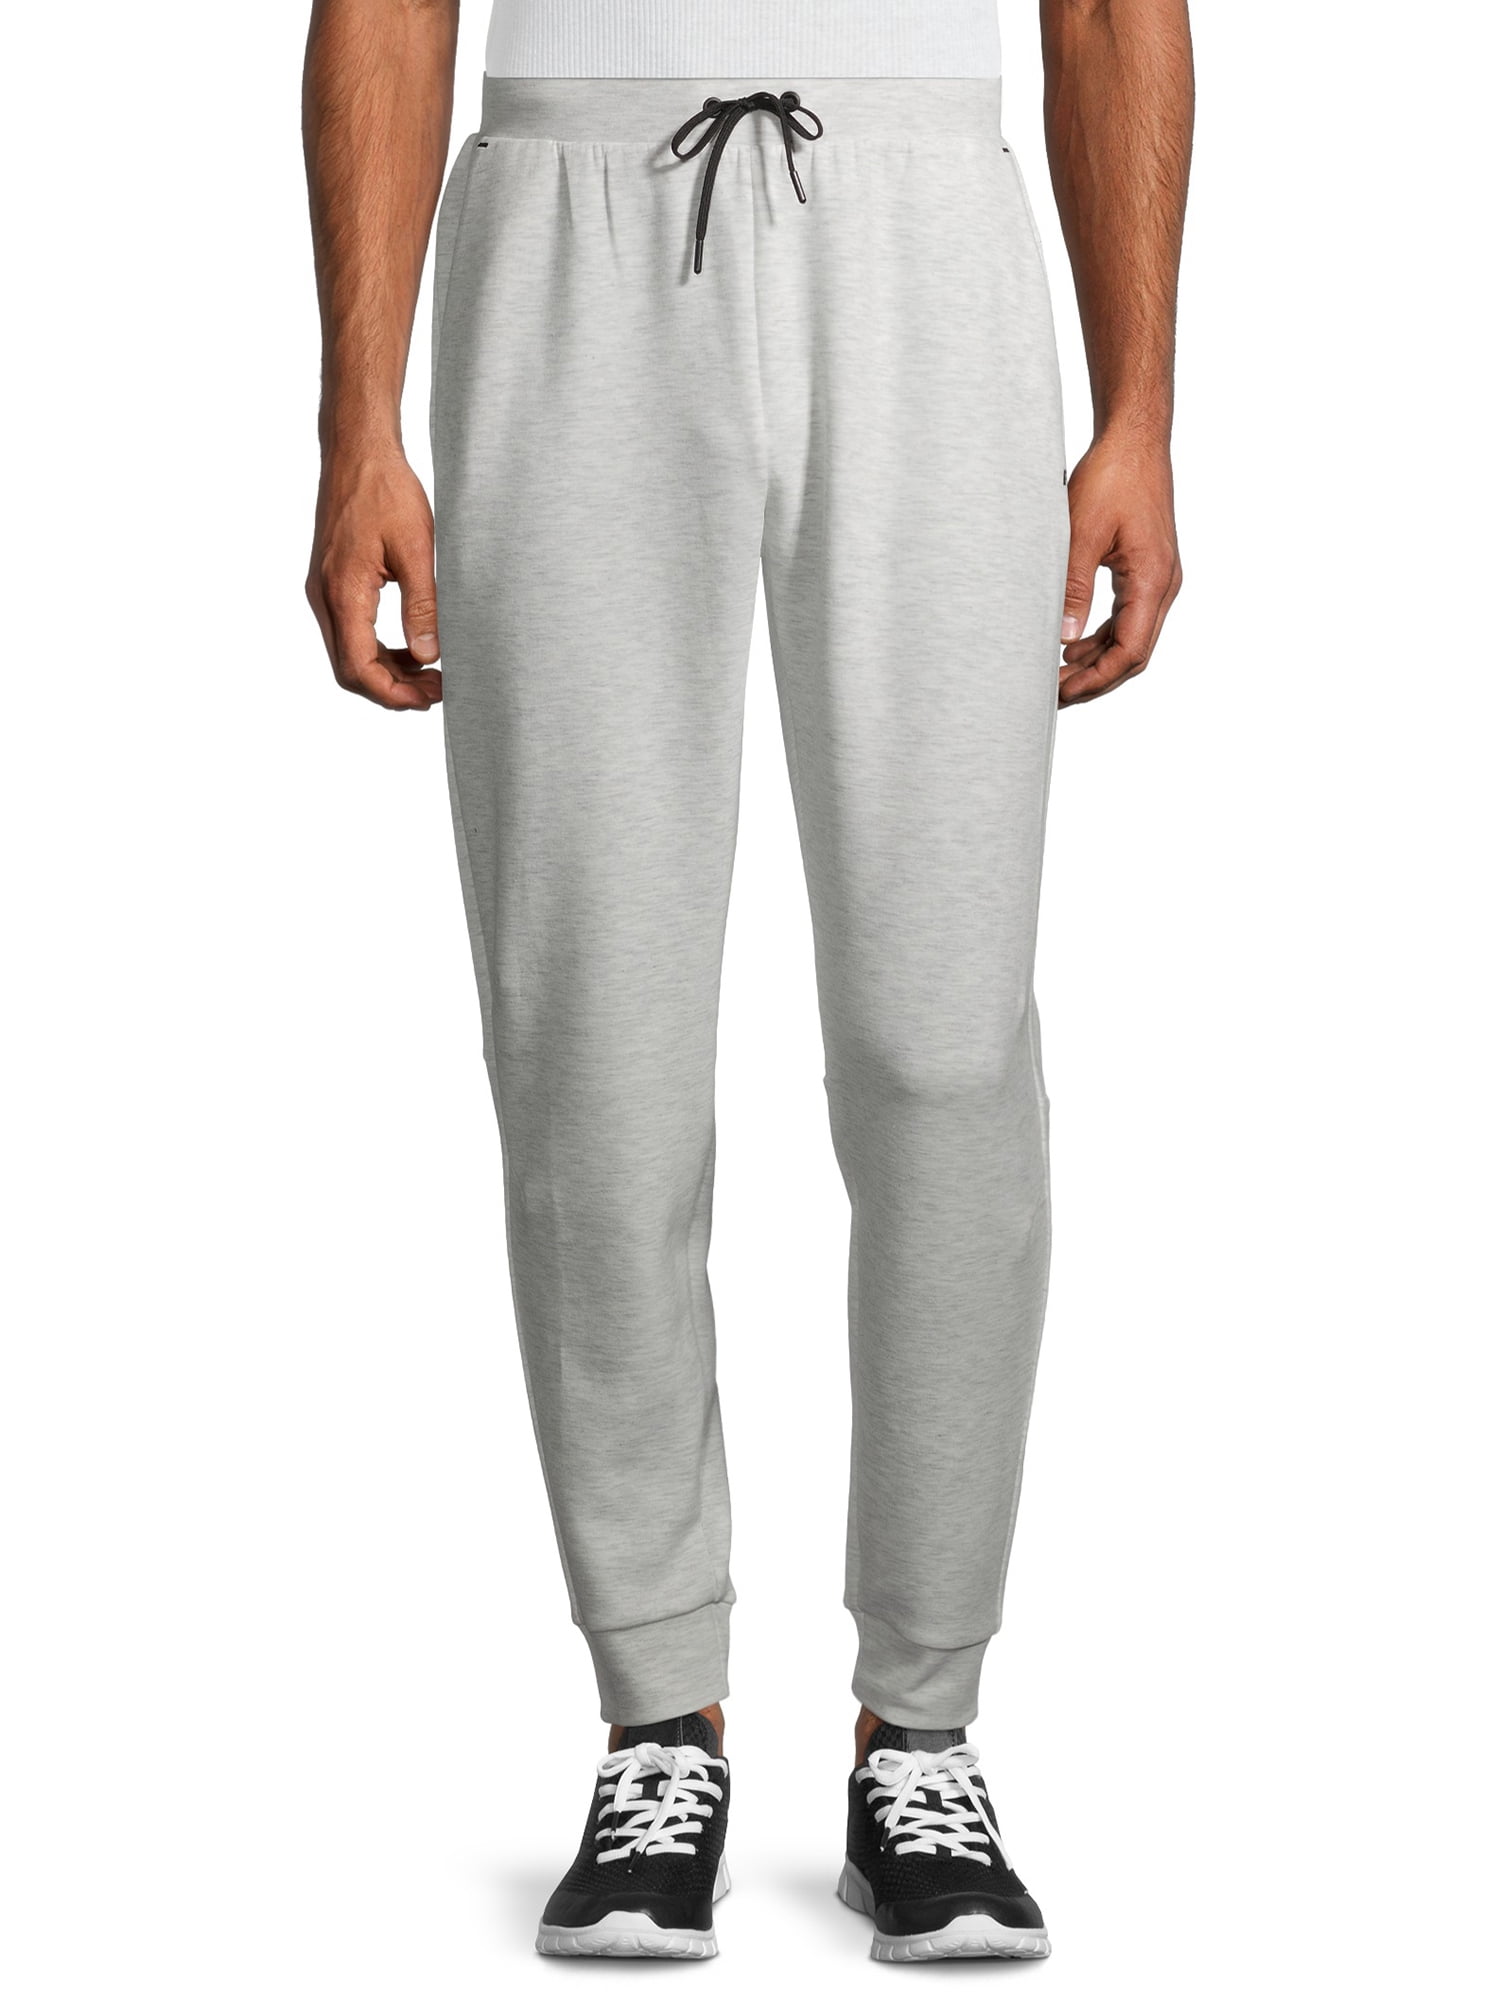 Russell - Russell Men's and Big Men's Active Fusion Knit Joggers, up to ...